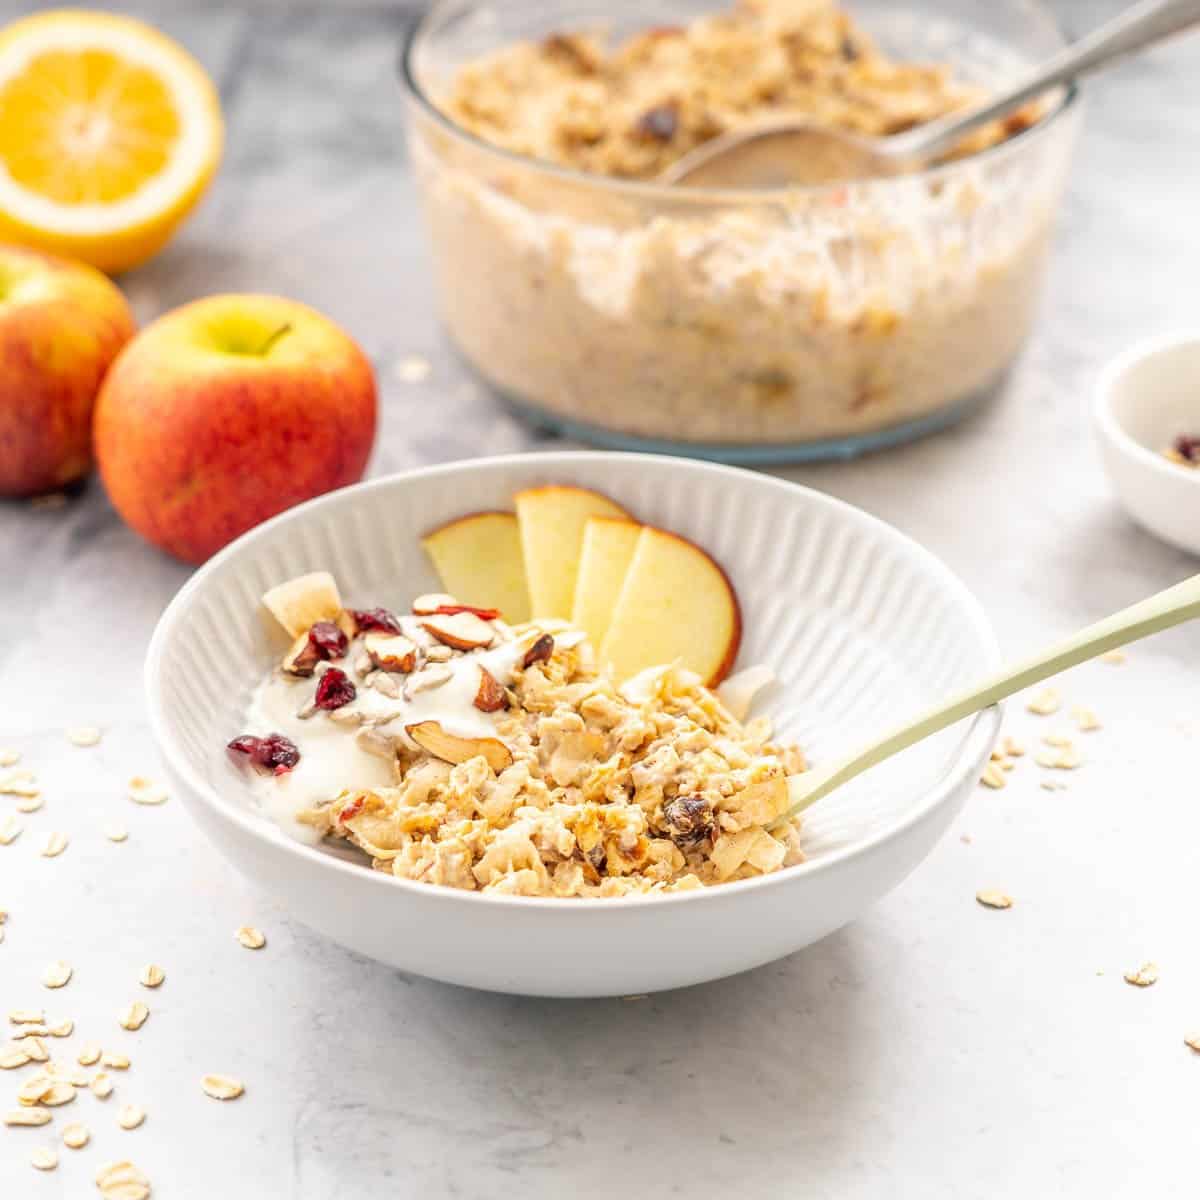 A dessert bowl with a serving of Bircher Muesli and sliced apples and drizzled honey sitting on the bench with a large serving dish in the background filled with Bircher Muesli in the background next to some red apples.